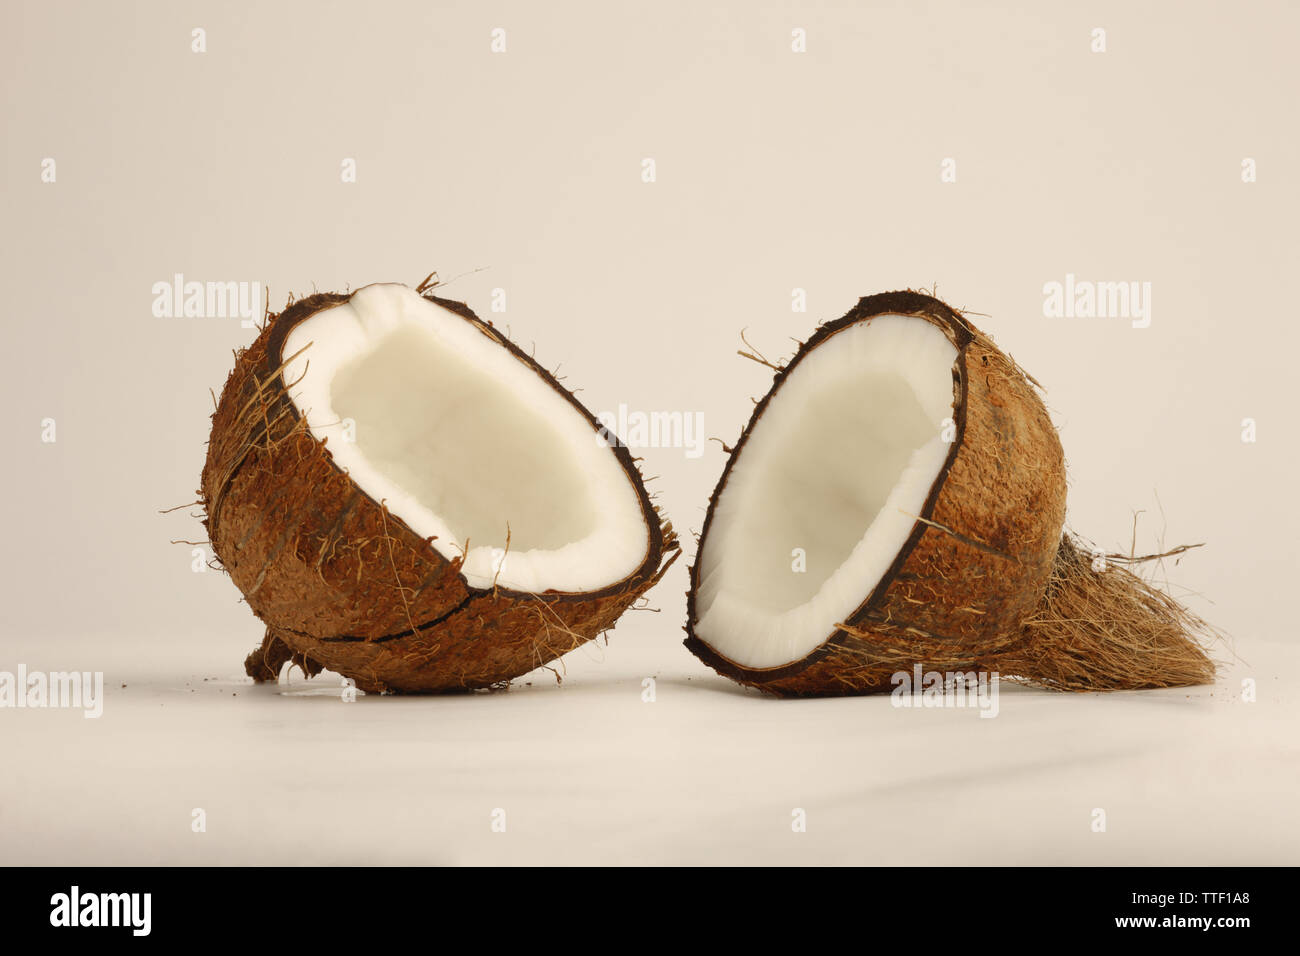 Close up of two halves of a coconut Stock Photo